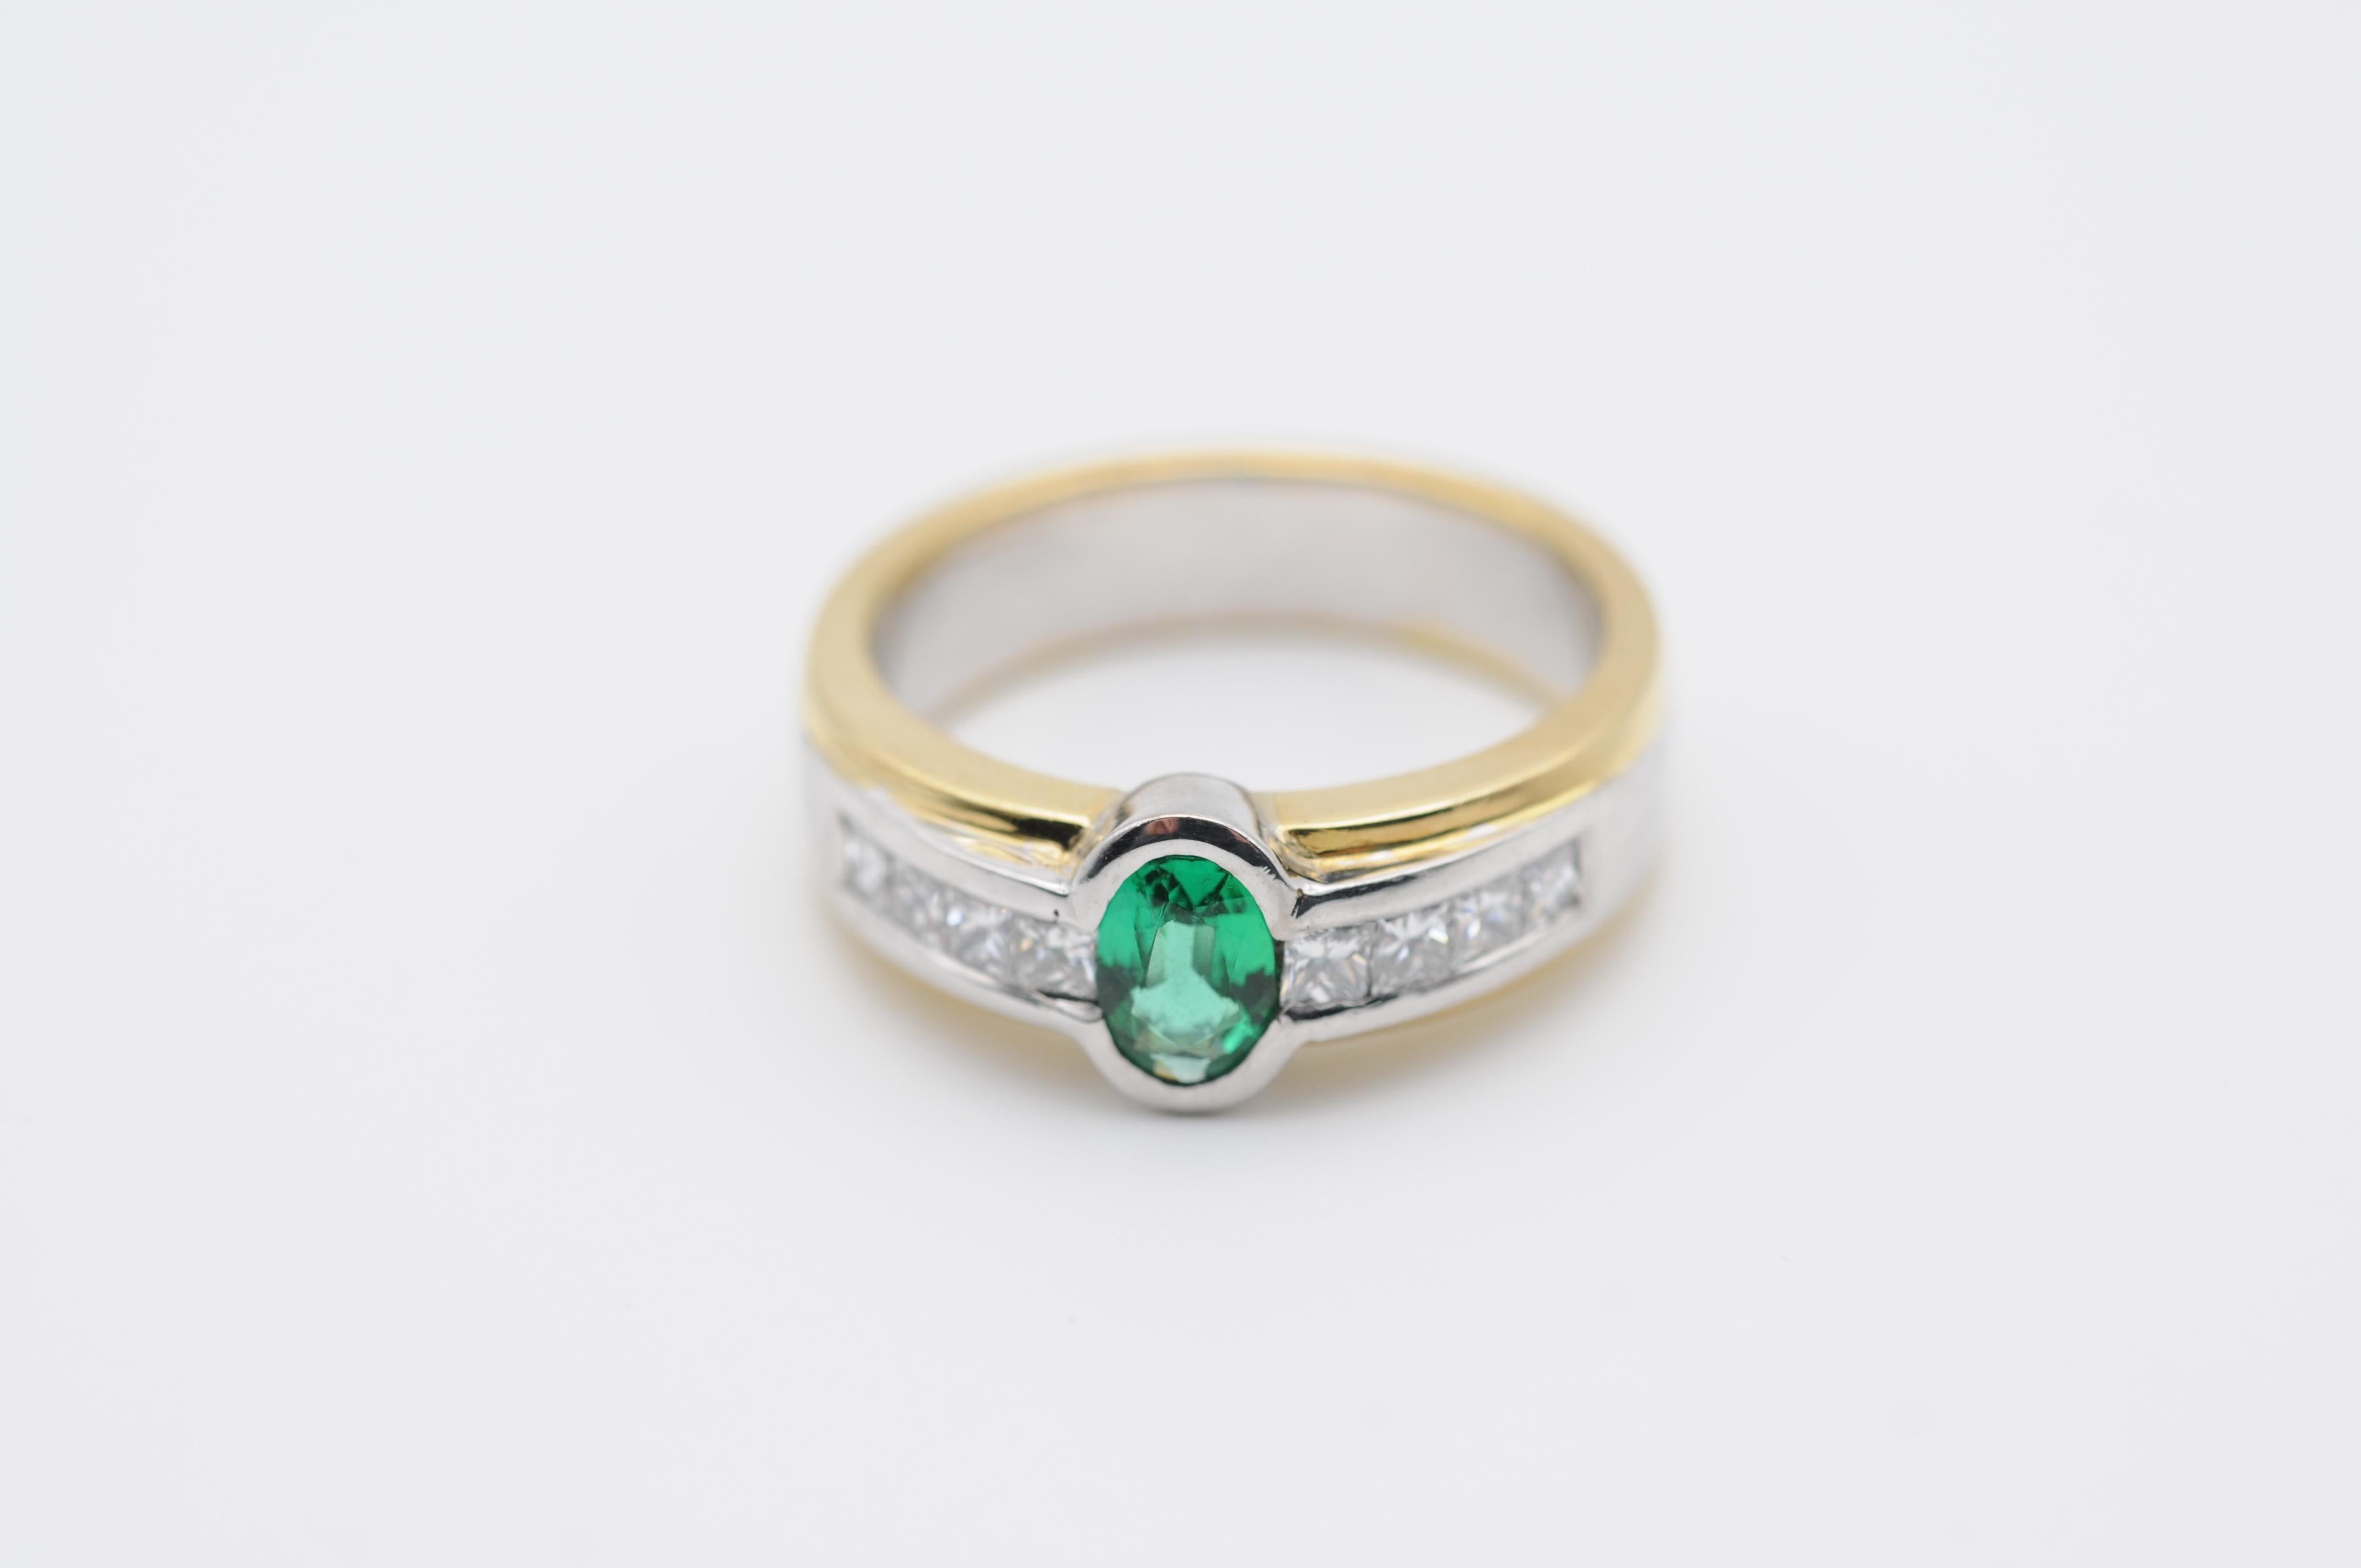 Unique Solitaire emerald Ring VVI, W . 18K

approximately 5 carats of diamonds and 0.70 emerald

Gold alloy: 18k white gold and yellow gold
Stones: 8 diamonds total carat approx. 0.72 ct.
Clarity: VSI/very small inclusions
Colour: W/Wesselton
Cut: